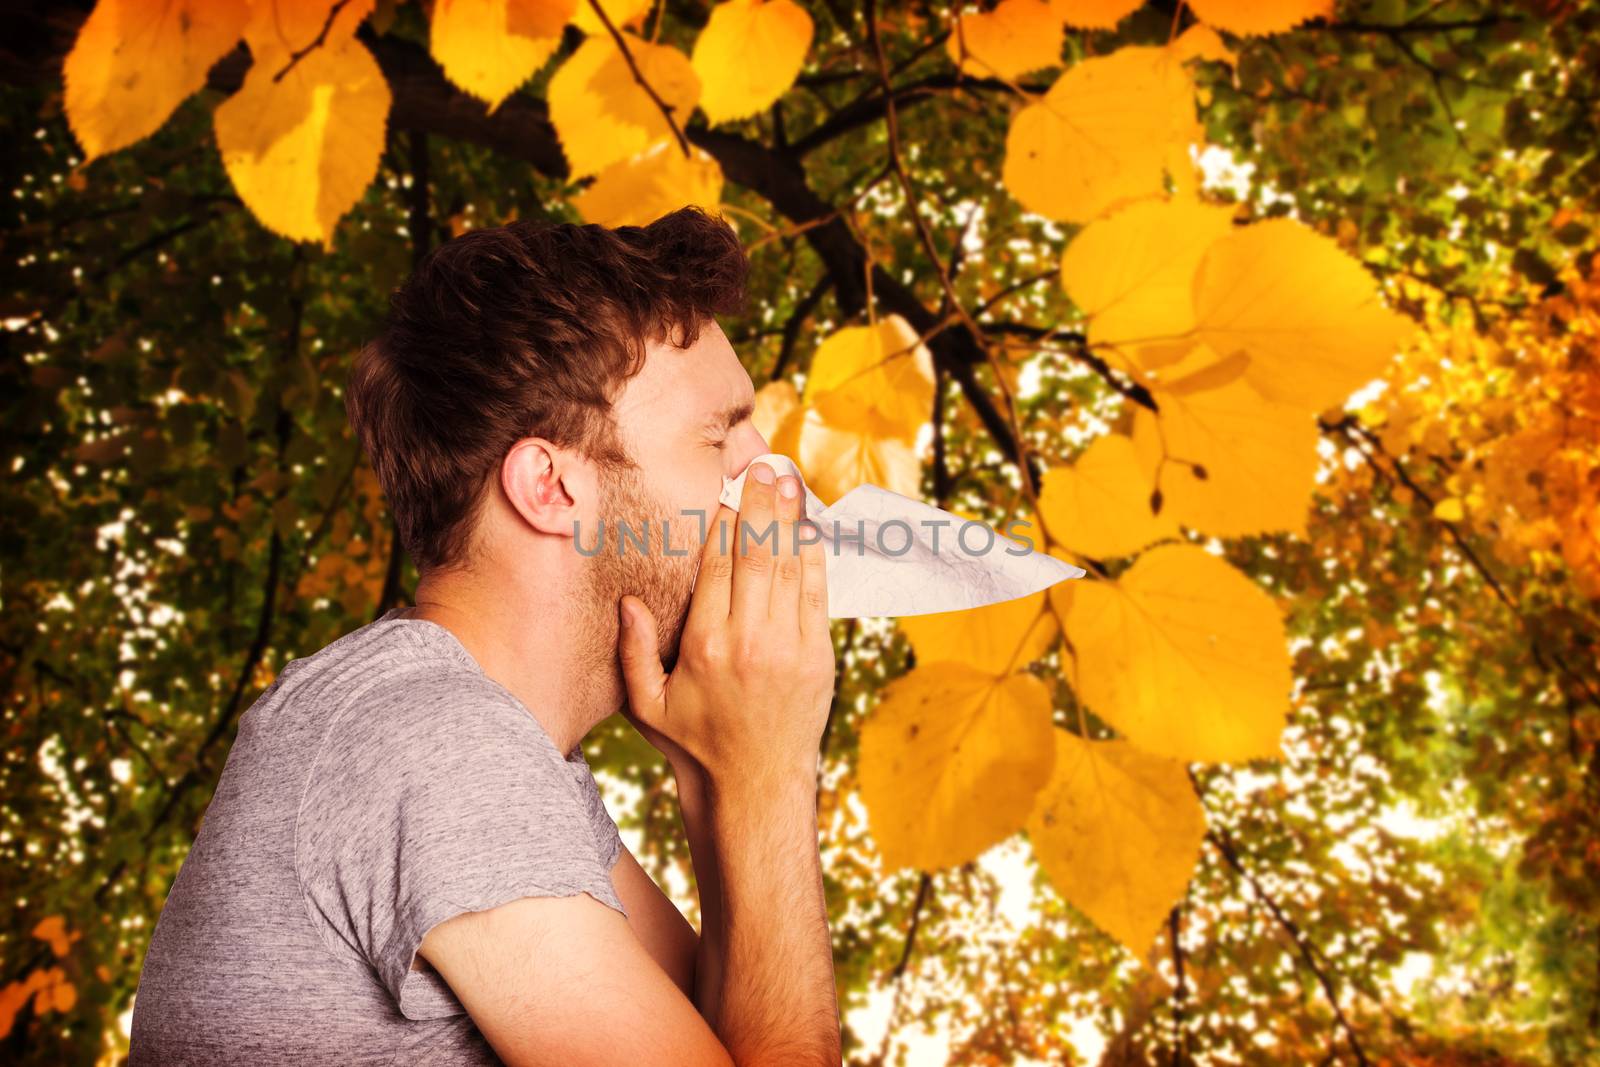 Close up side view of man blowing nose against autumnal leaves against plants